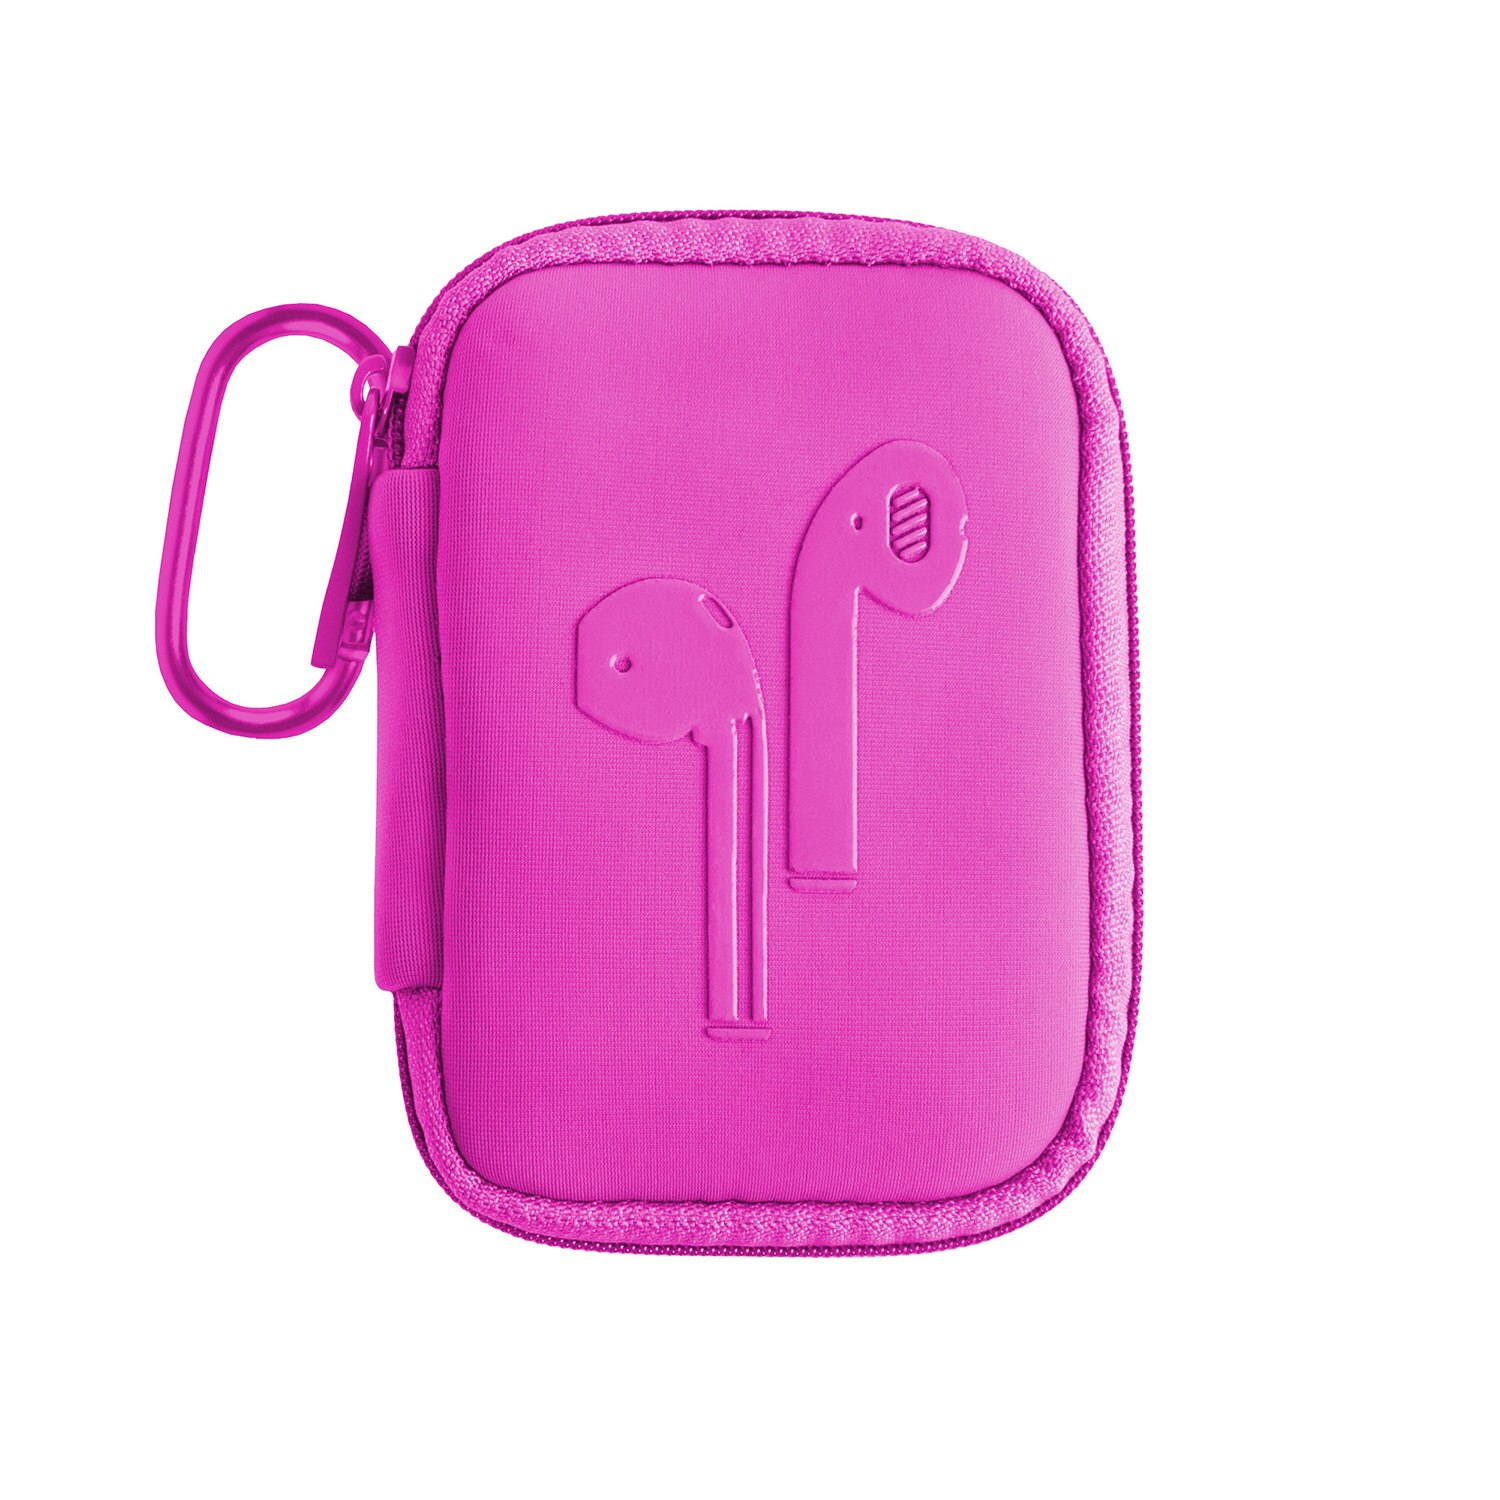 Everleigh Ear Bud Case with Carabiner- Berry